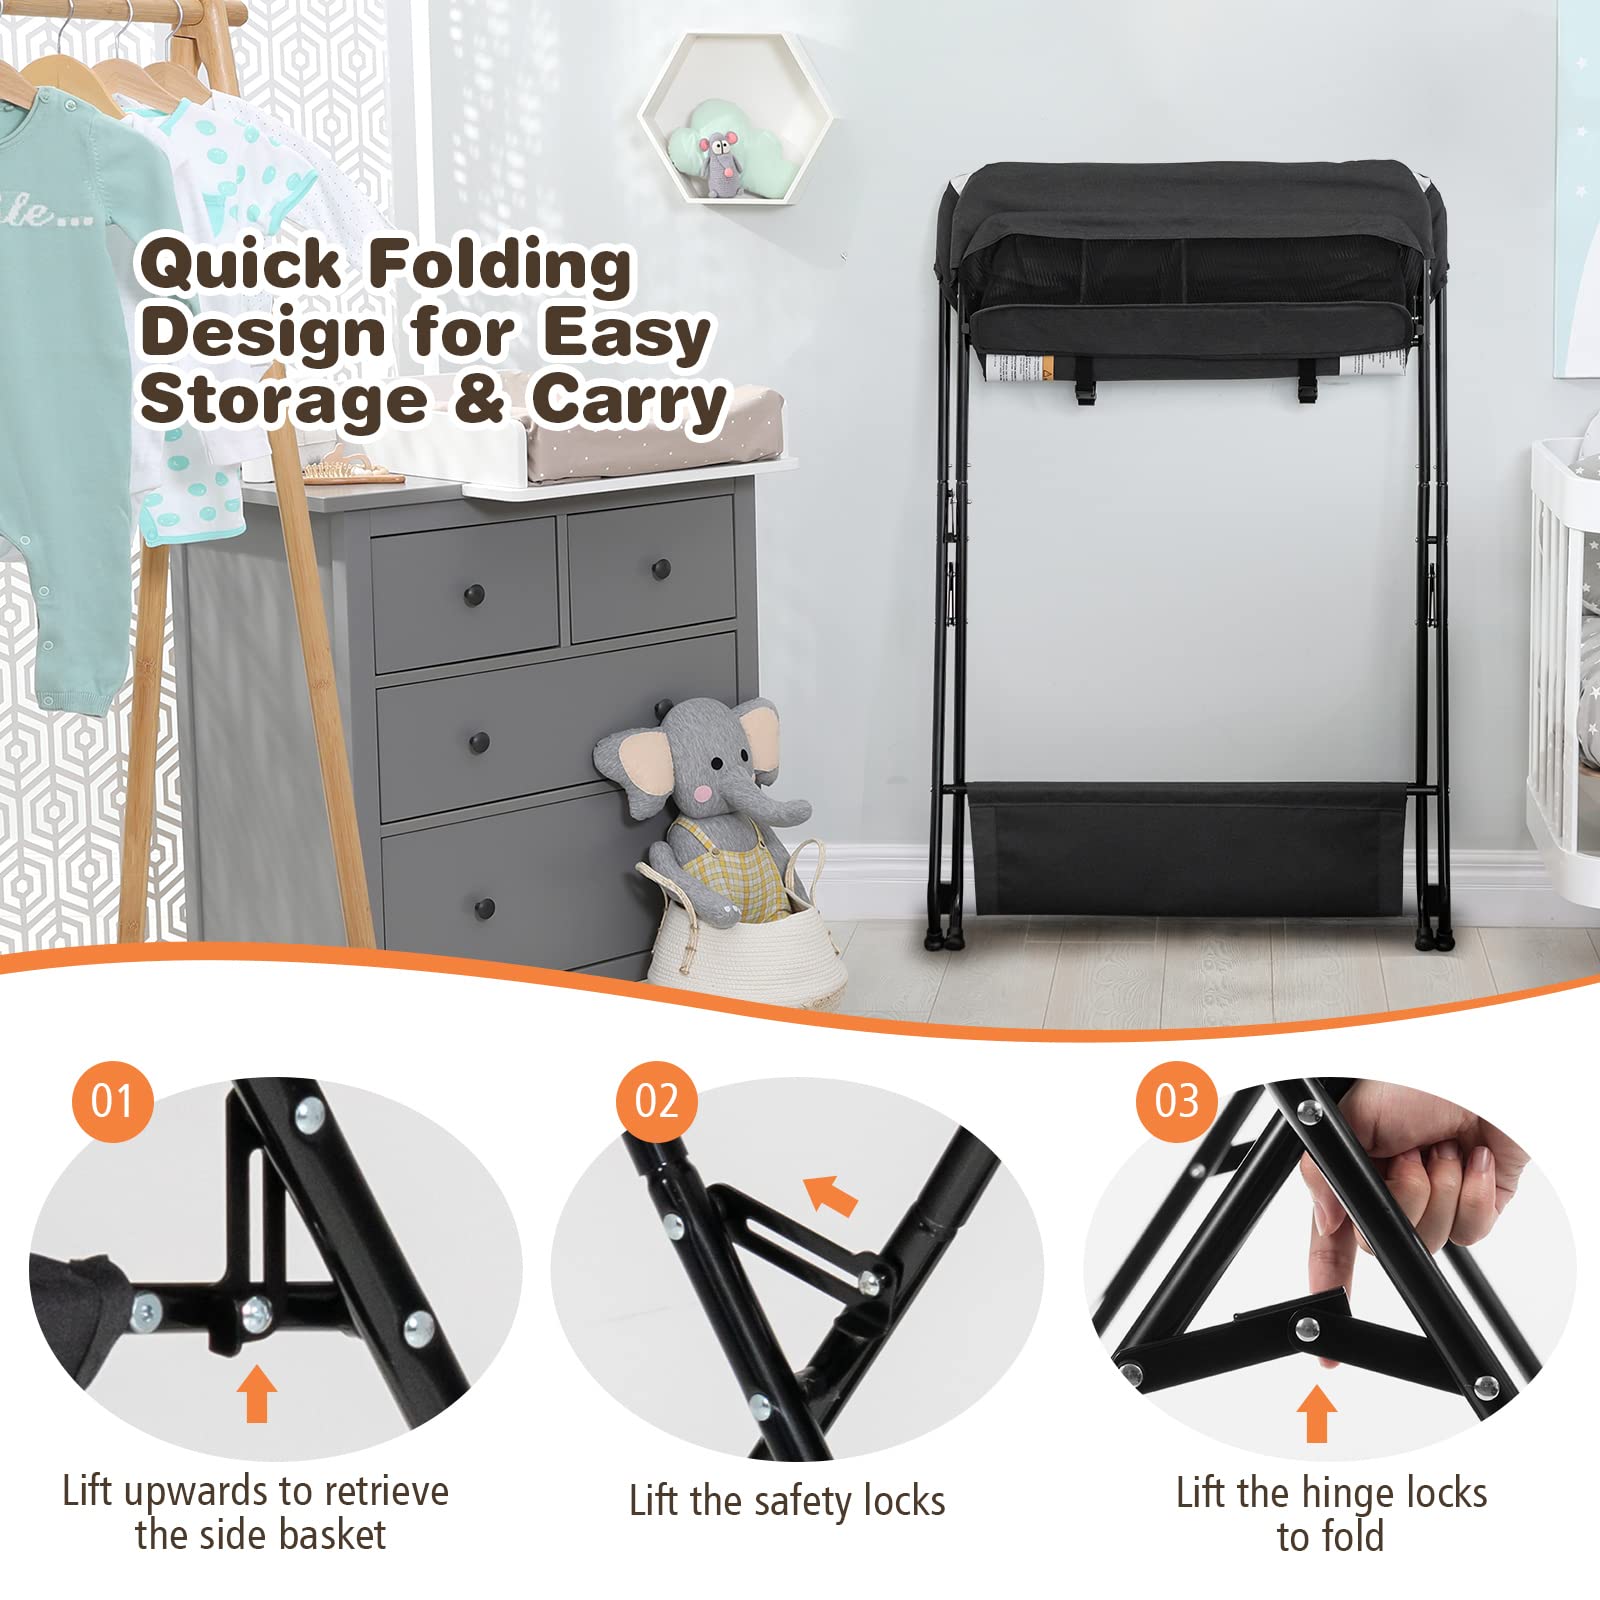 Costzon Changing Table, Portable Baby Changing Table Foldable Diaper Changing Station with Safety Belt, Large Storage Rack & Shelf, Nursery Organizer for Newborn Infant (Black)